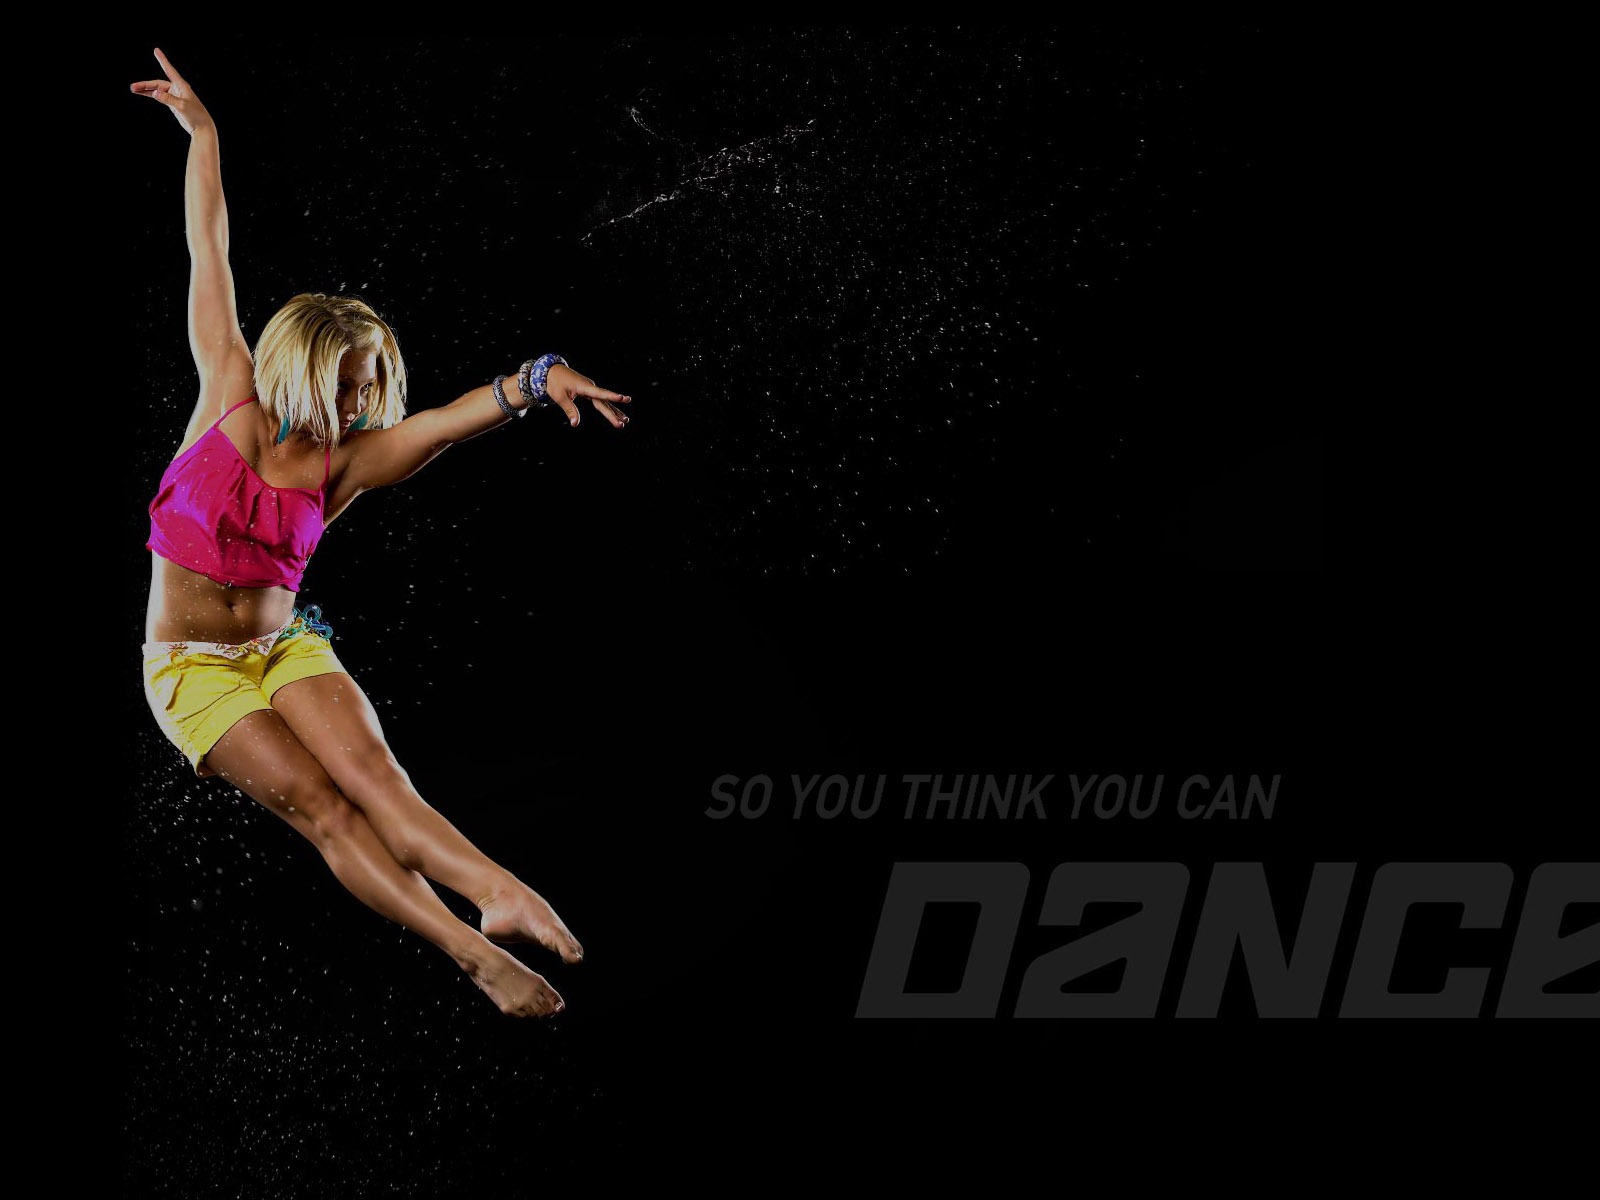 So You Think You Can Dance wallpaper (1) #5 - 1600x1200